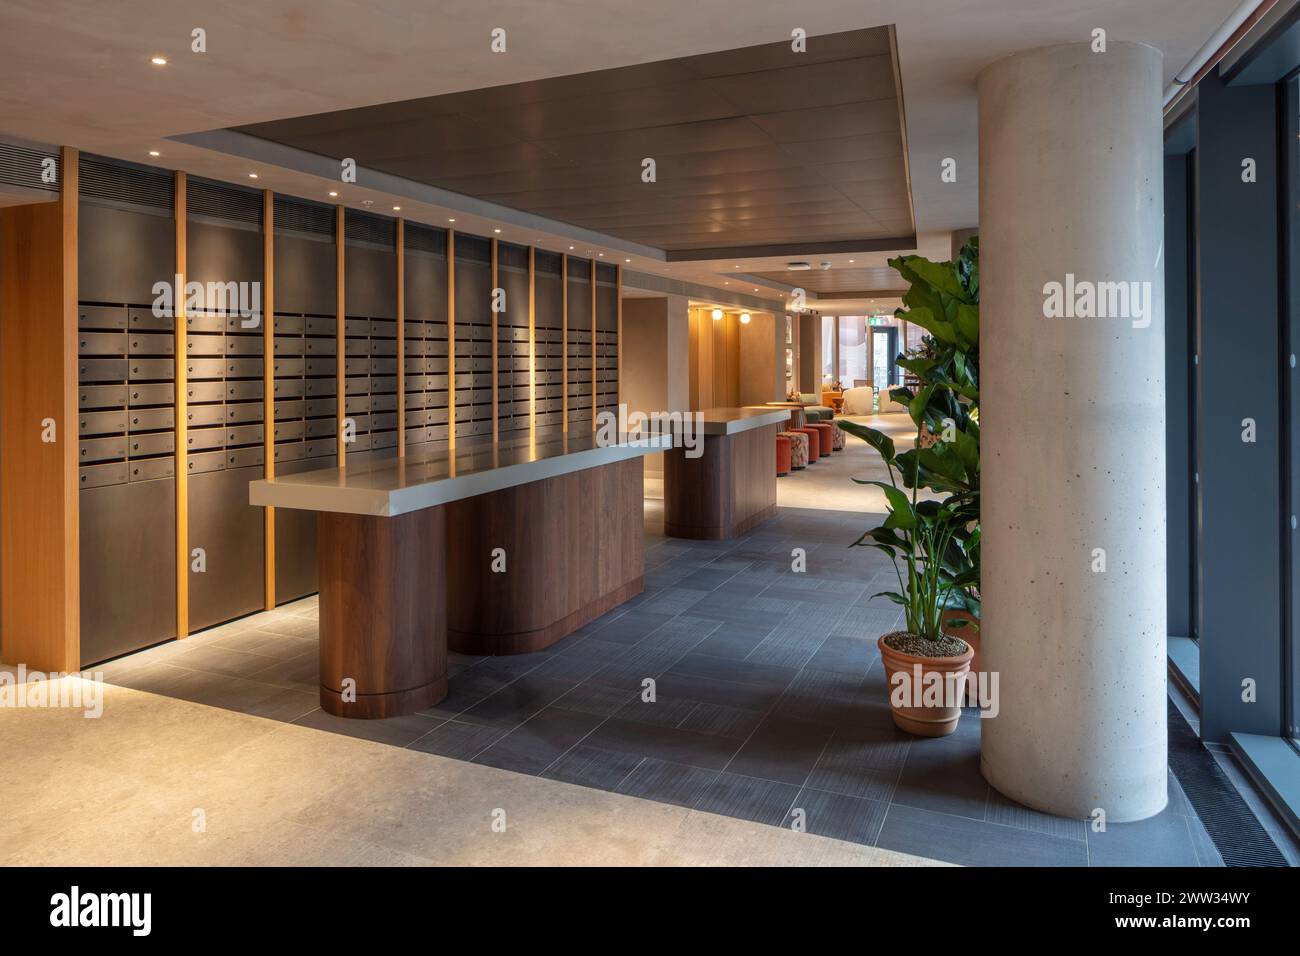 Communal entrance lobby with letter boxes. Author, London, United Kingdom. Architect: Conran & Partners, 2023. Stock Photo